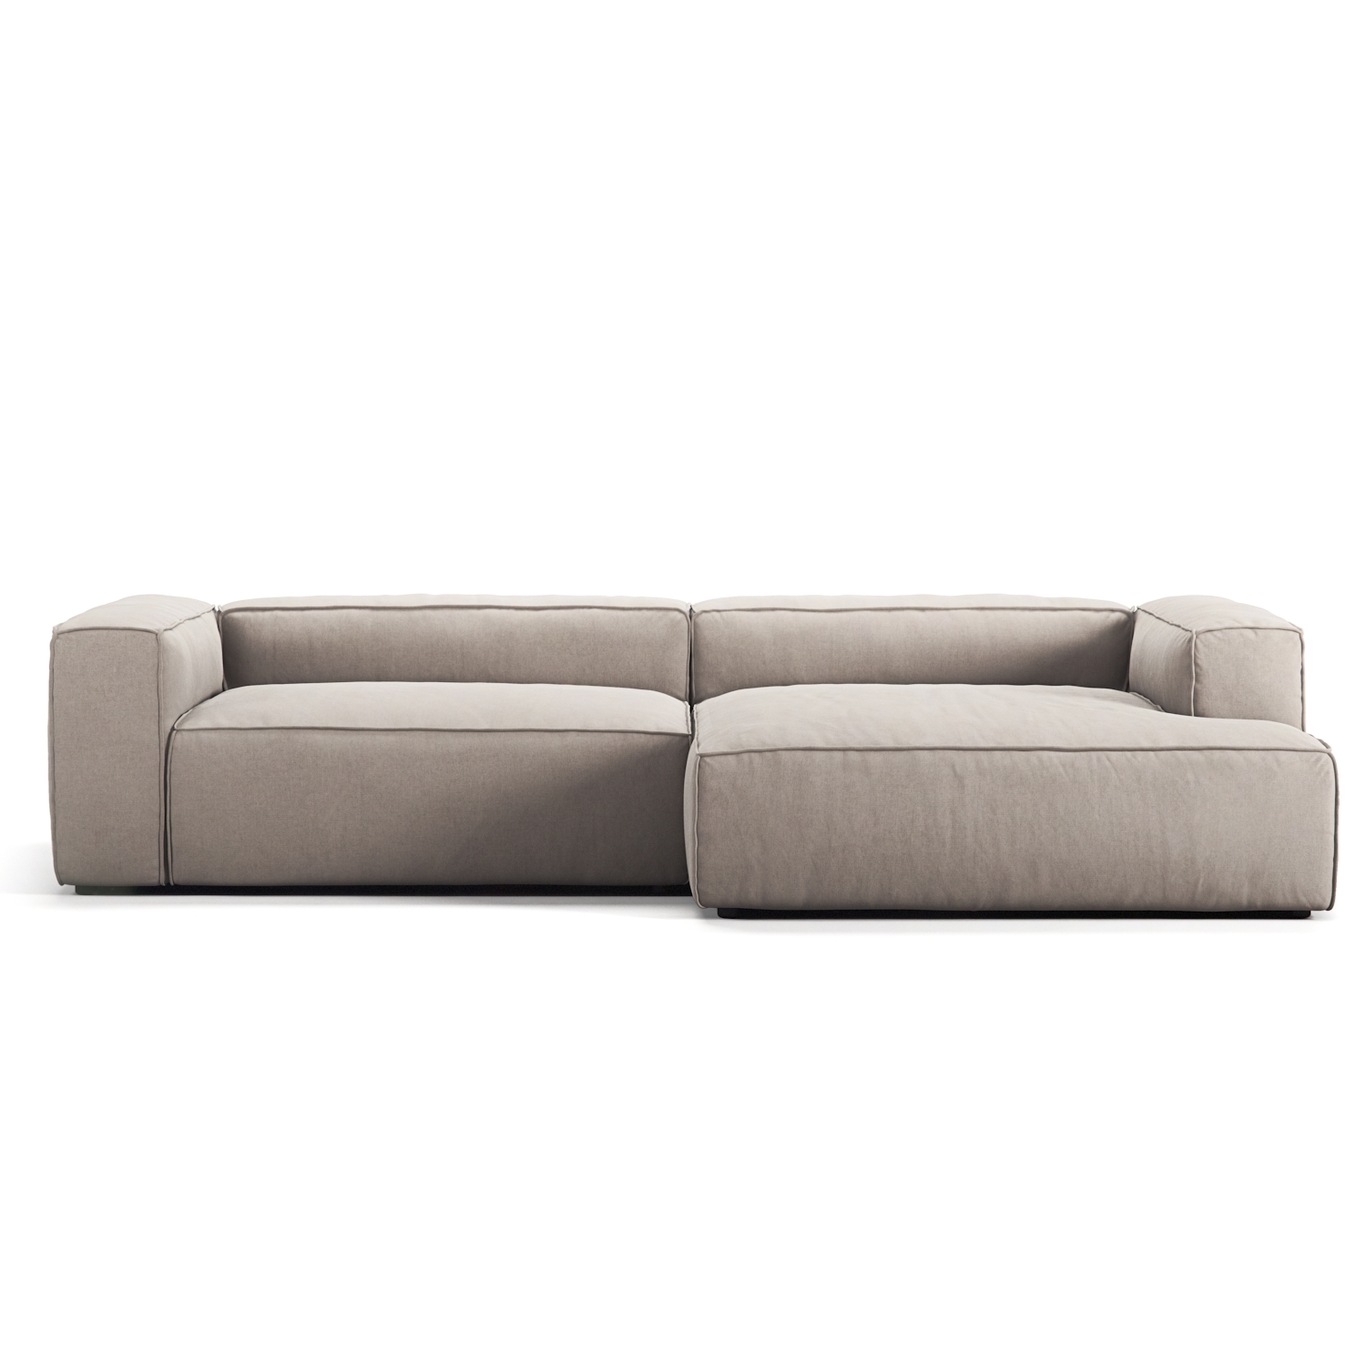 Grand 3 Seater Sofa chaise Longue Right, Sandshell Beige